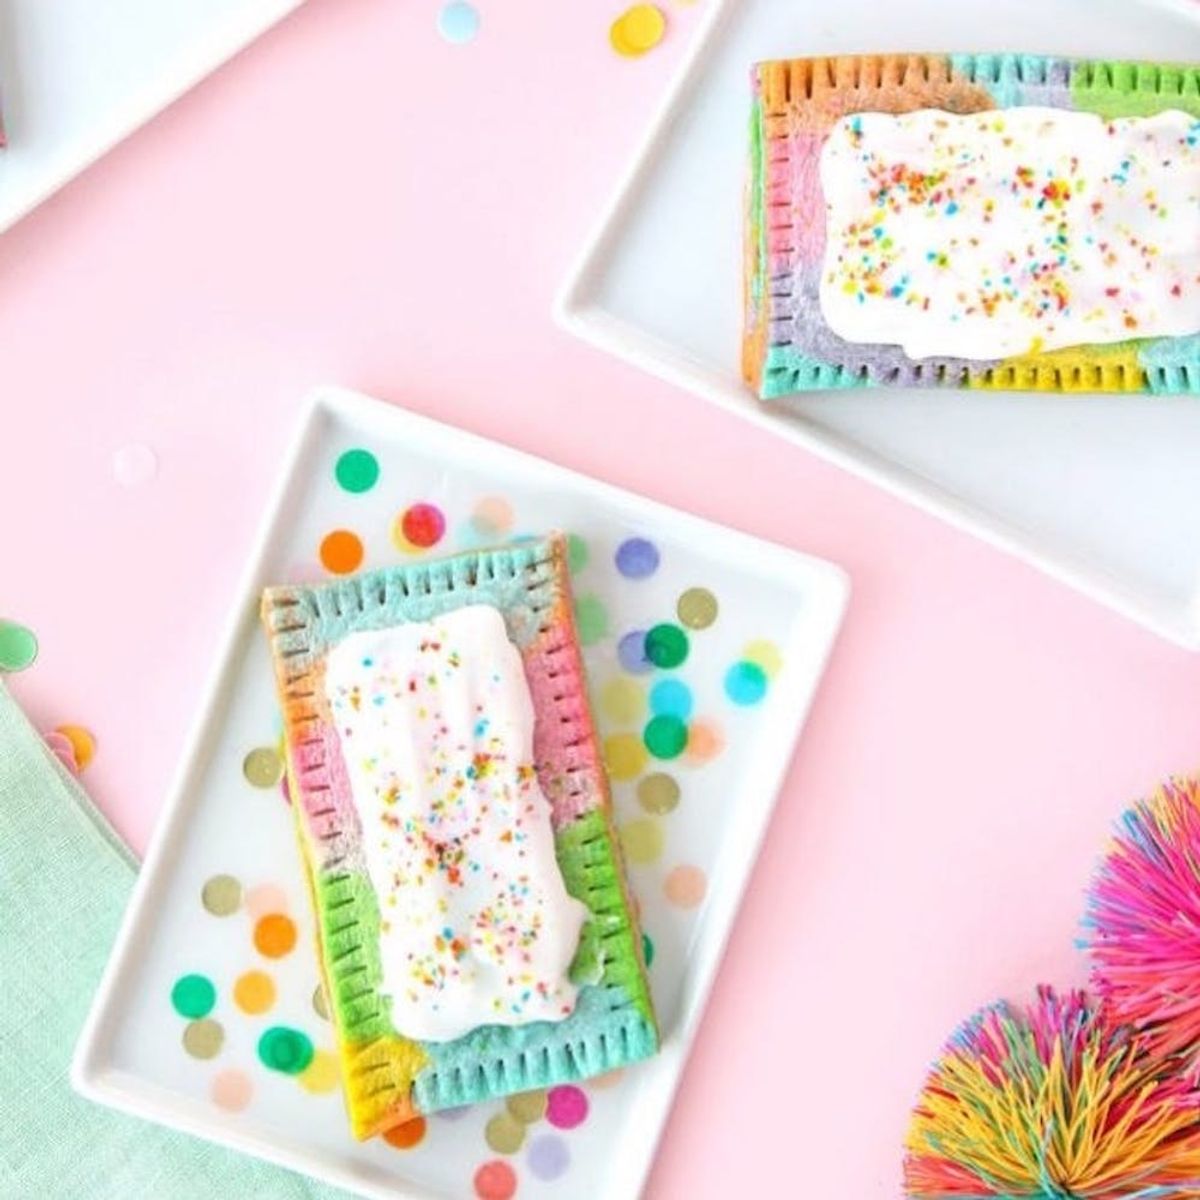 12 Tie Dye Dessert Recipes That Will Bring You Back to the ‘70s